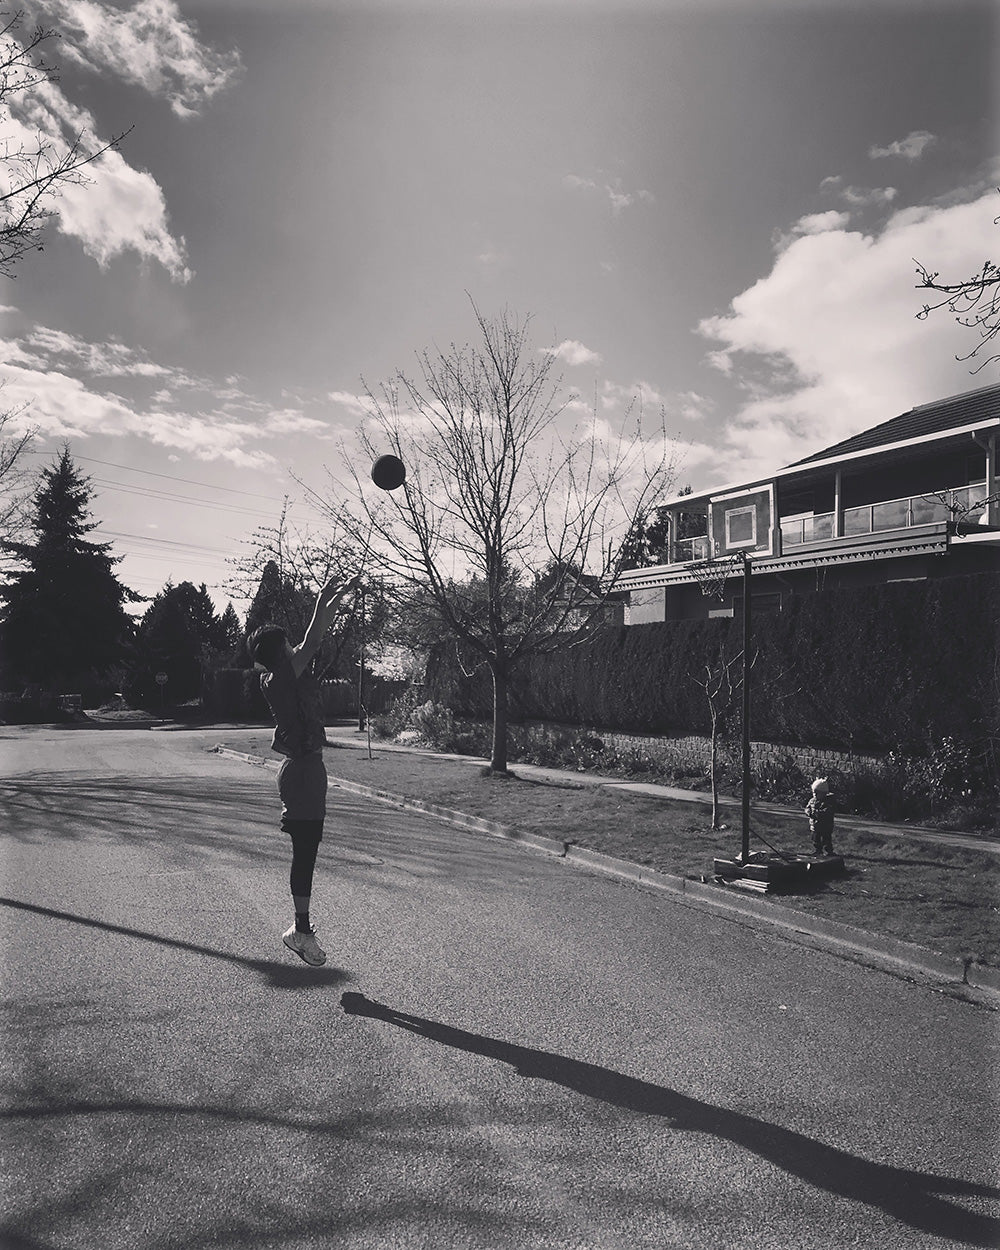 SPITGAN WEBZINE #3 Photo 10. Black and white photo of young man on the street shooting hoops with young toddler watching. Vancouver, BC